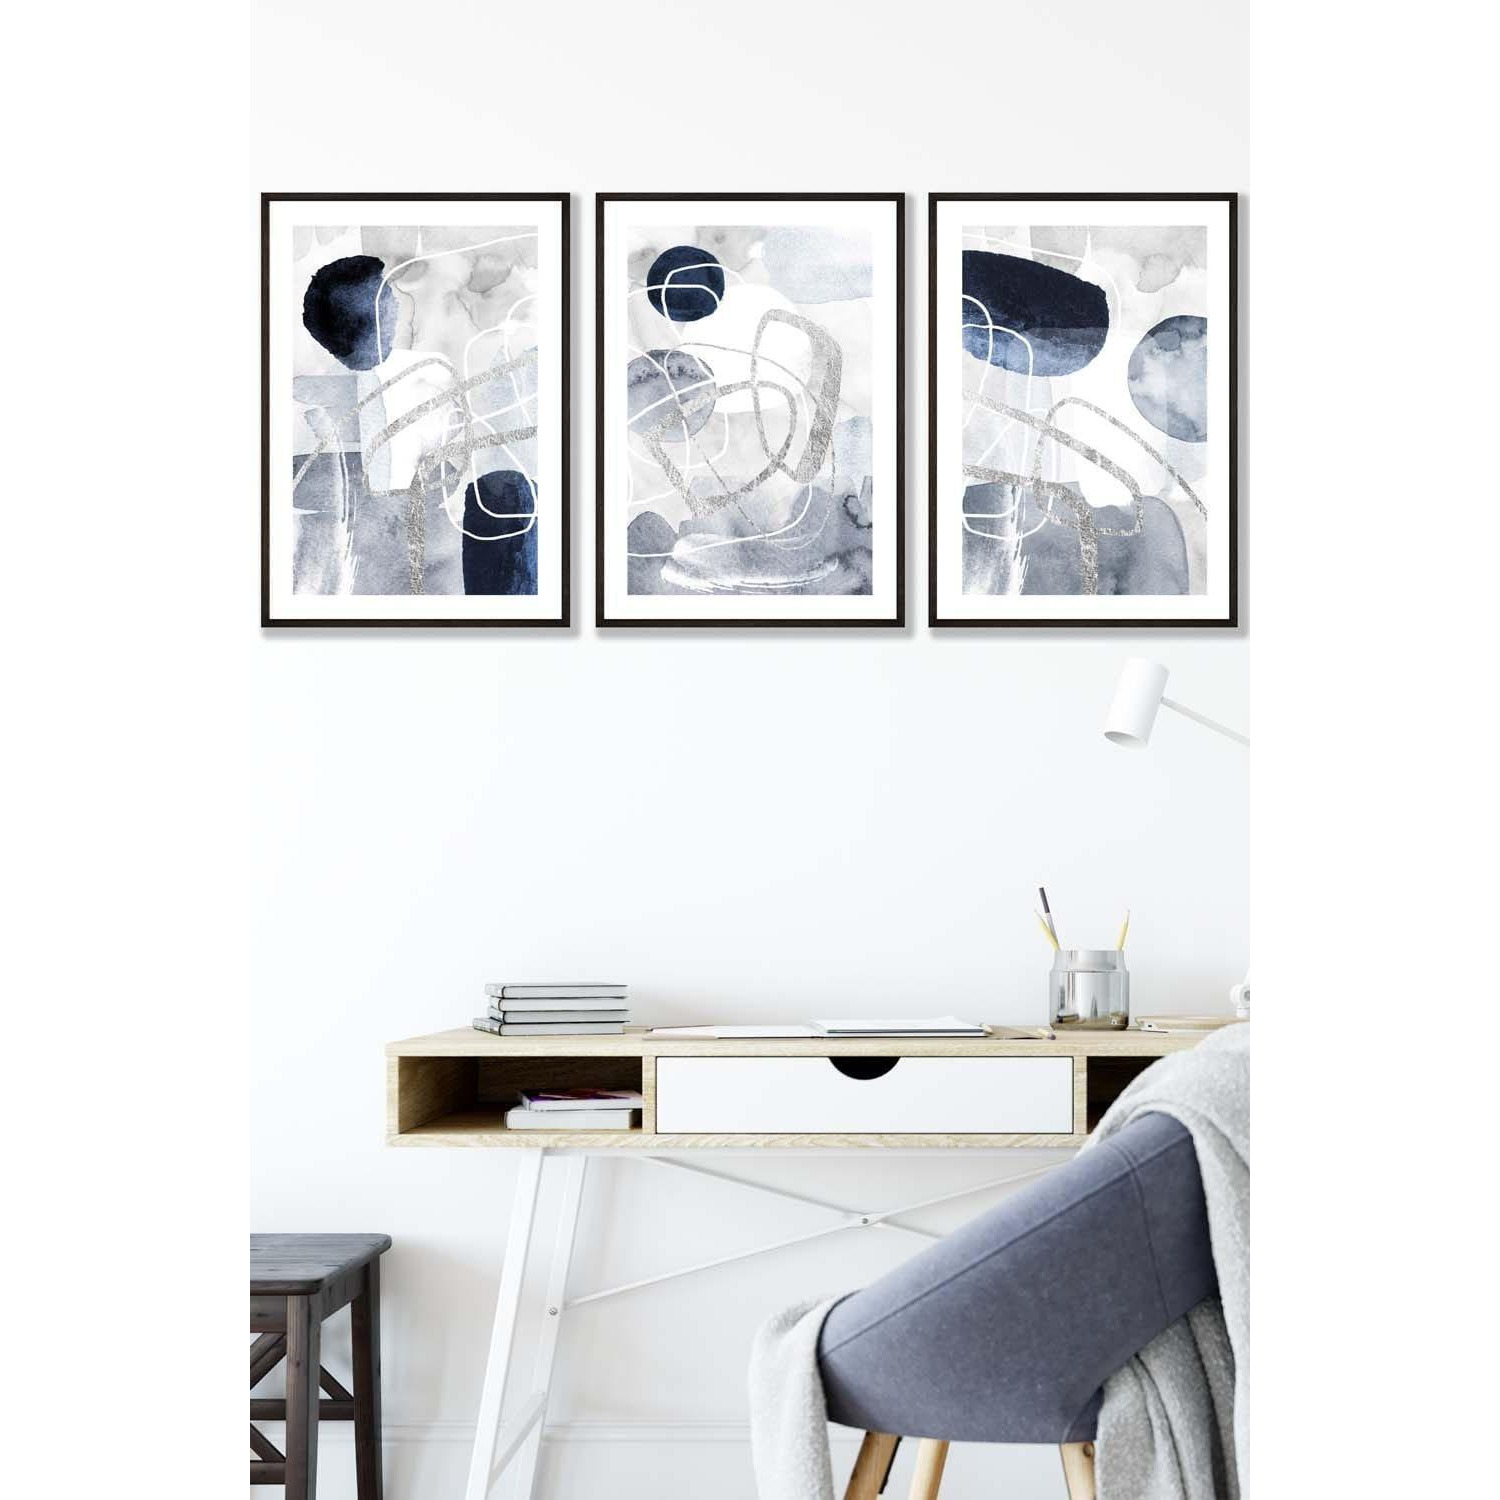 Set of 3 Black Framed Abstract Navy Blue and Silver Watercolour Shapes Wall Art - image 1